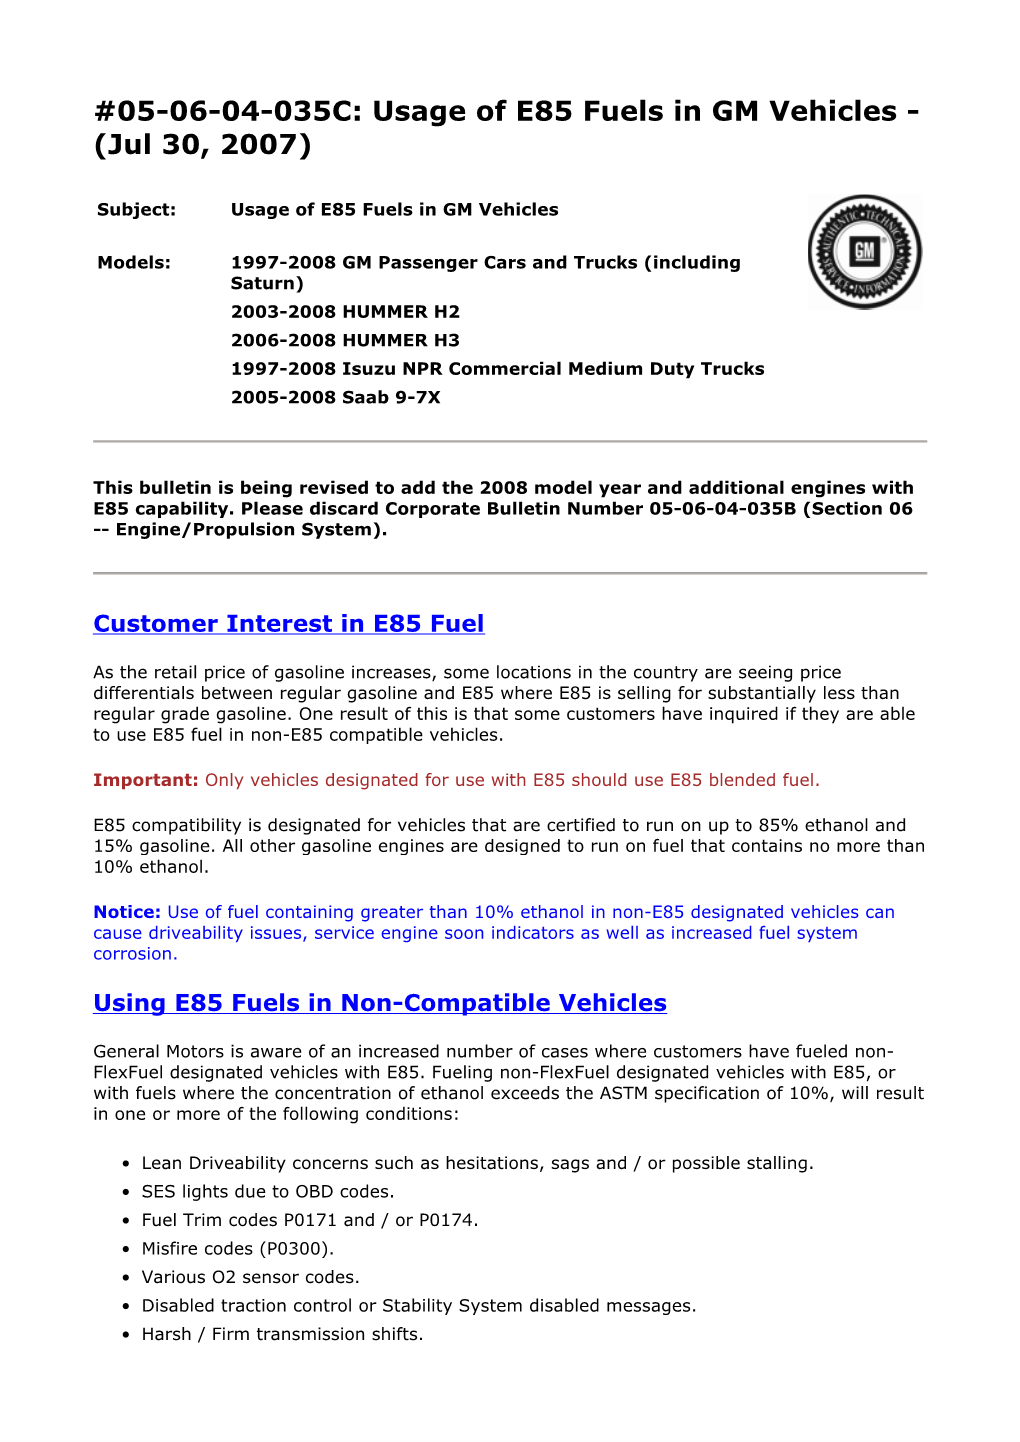 05-06-04-035C: Usage of E85 Fuels in GM Vehicles - (Jul 30, 2007)